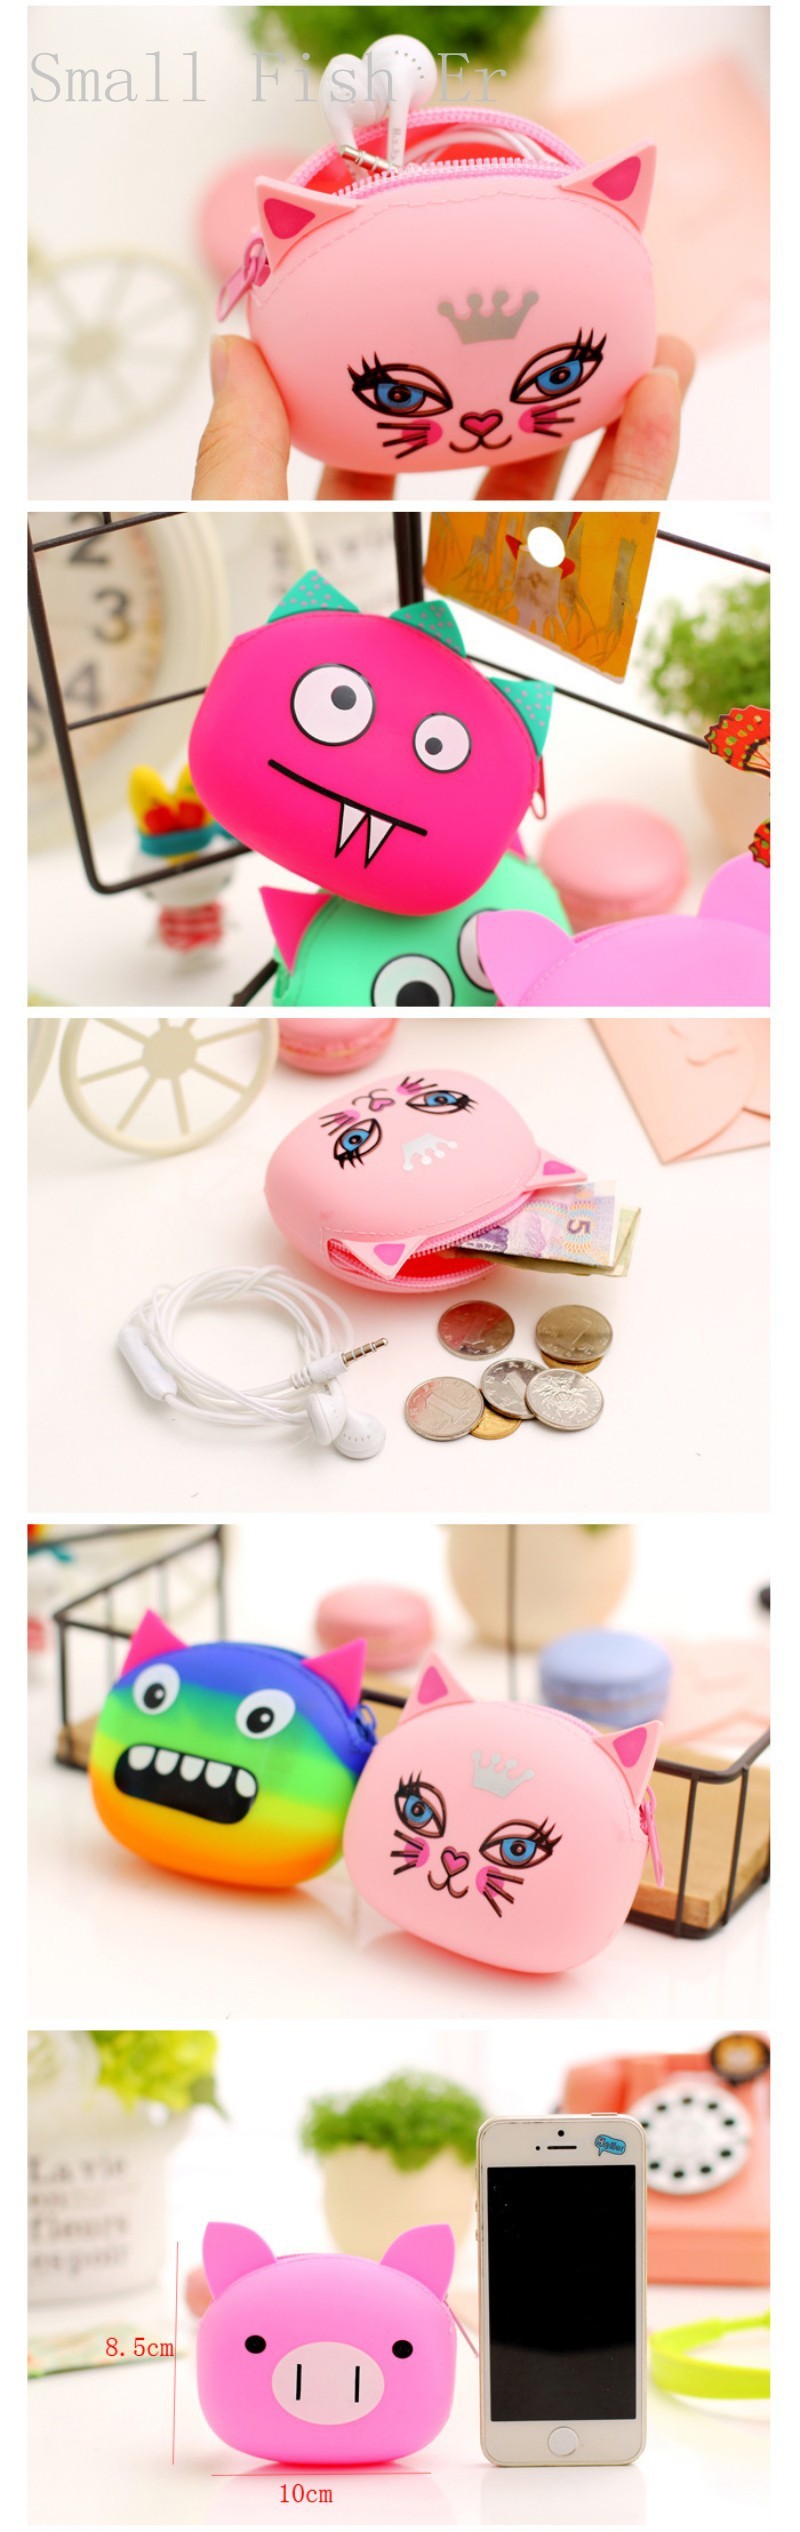 Monster Animal hand coin purse 108.5cm Jelly Rubber Silicone zipper Wallet Bag (3)